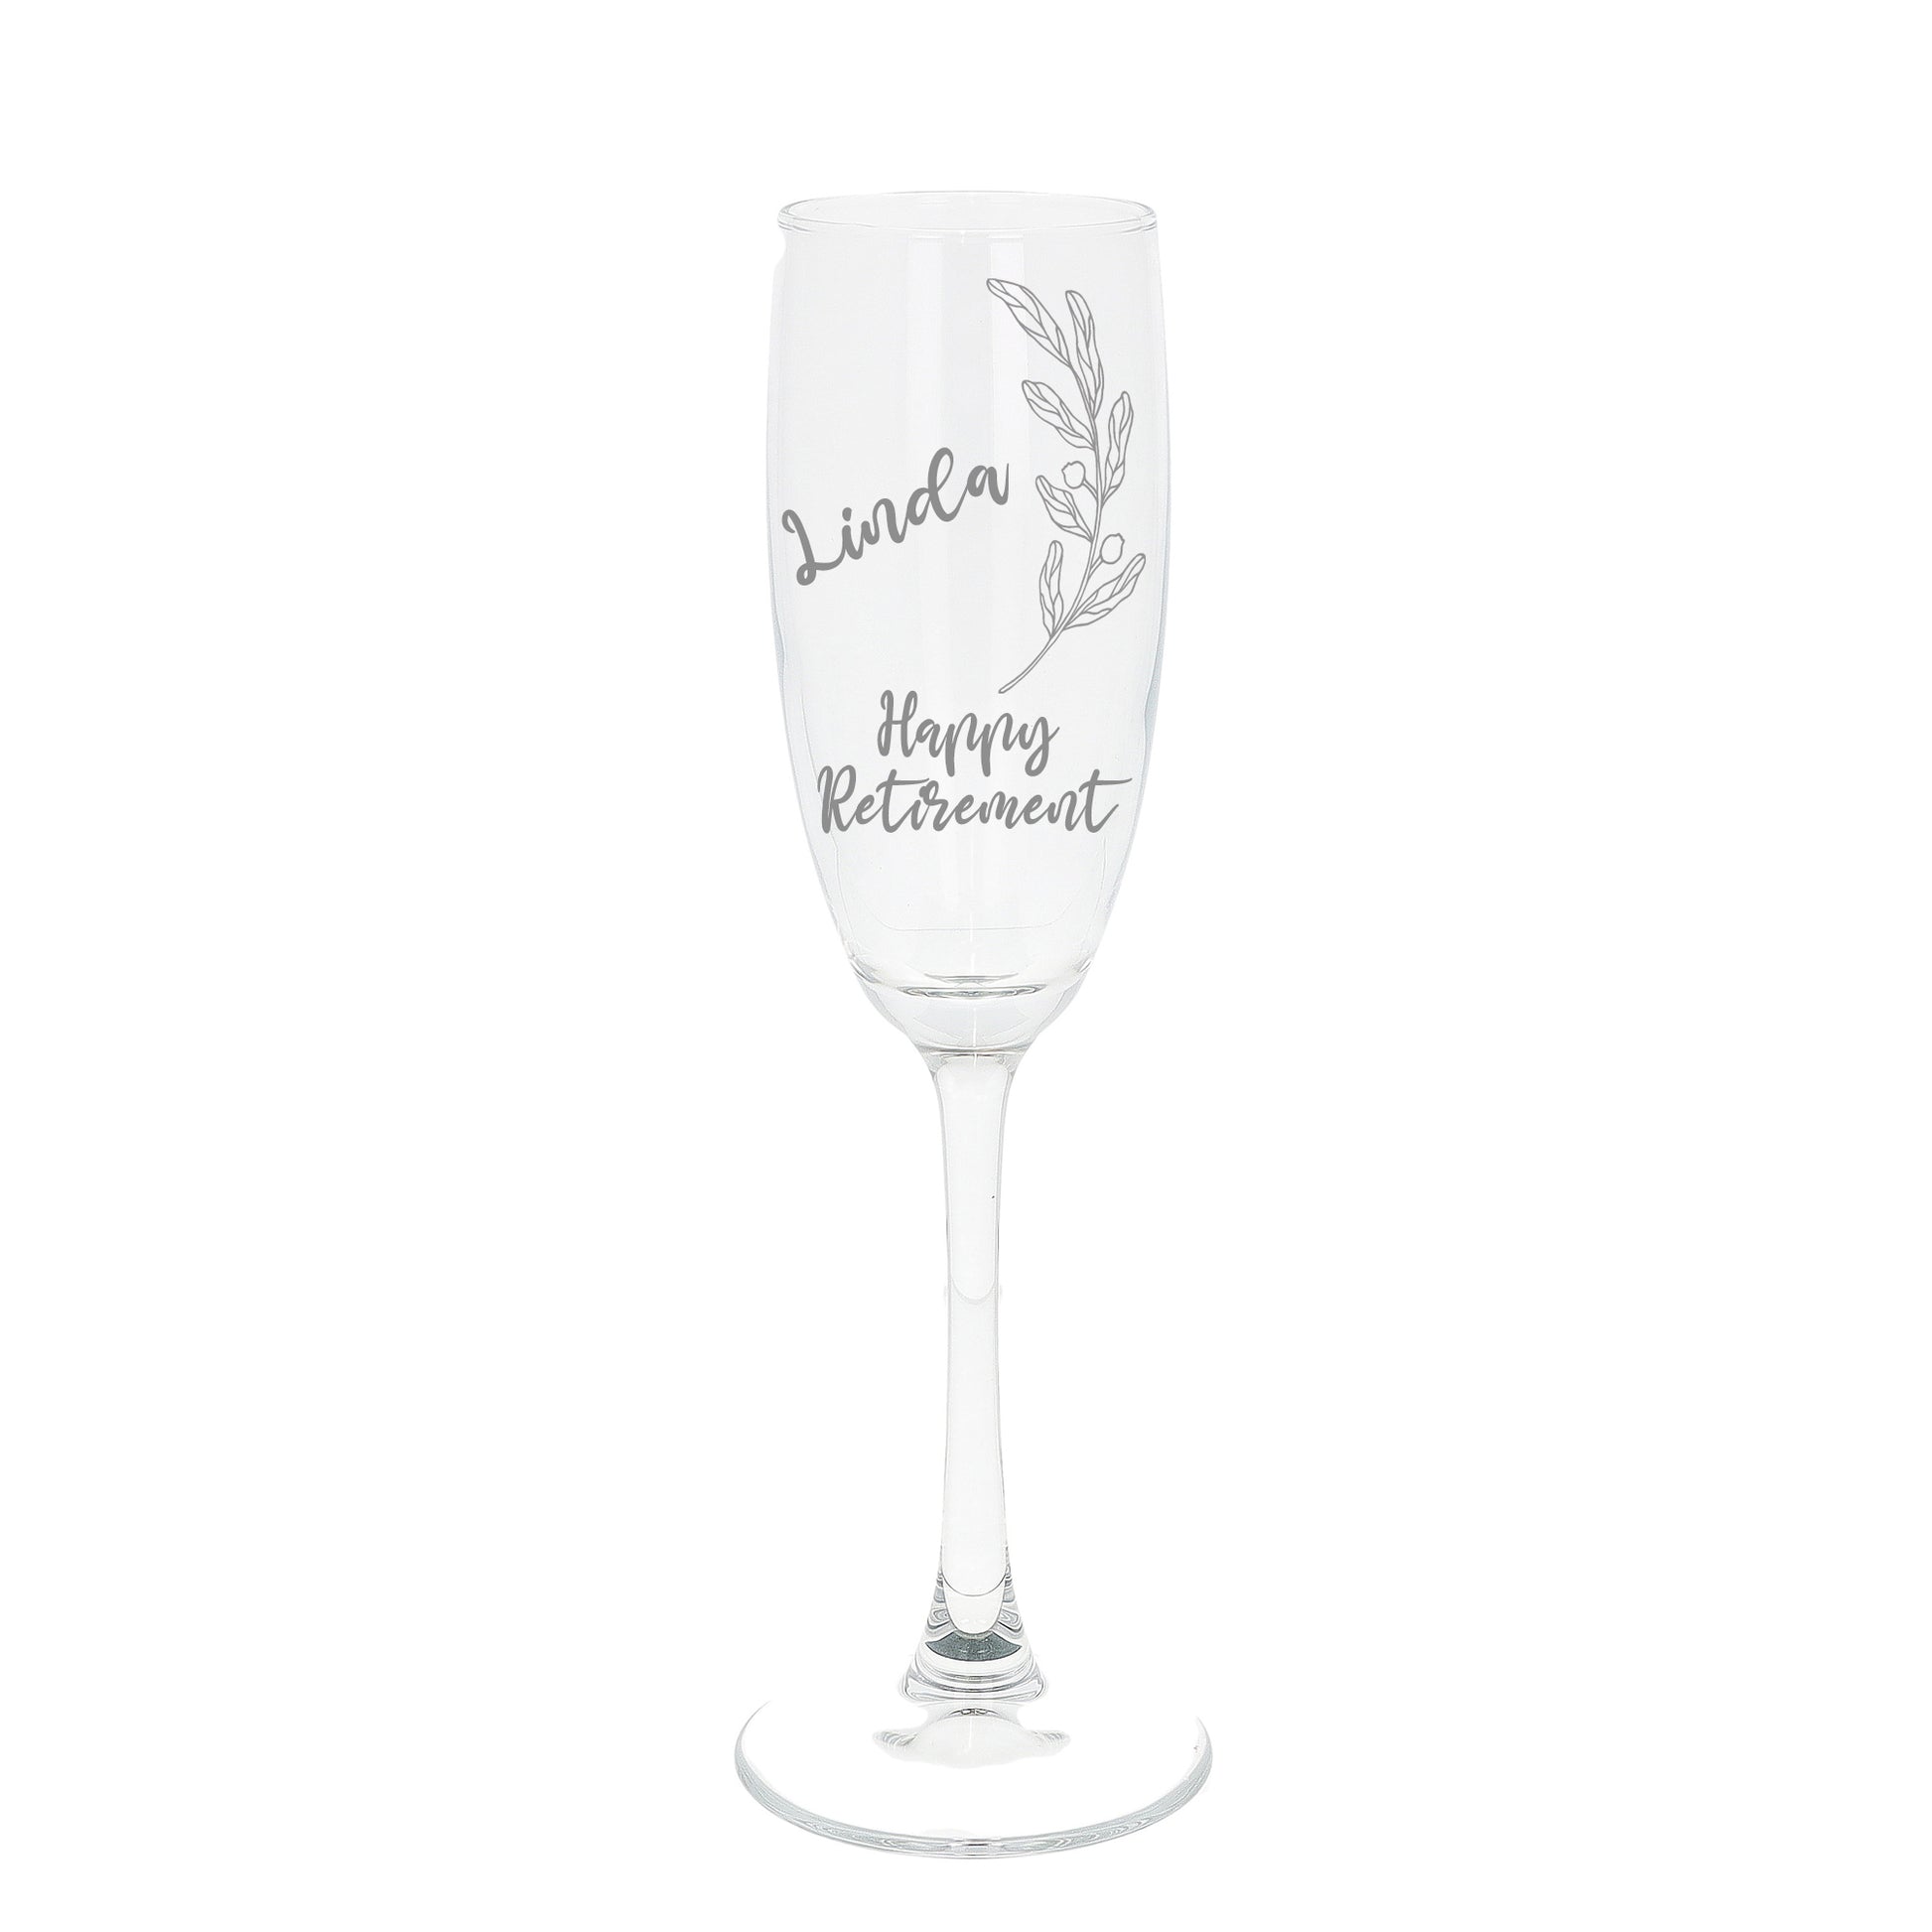 Personalised Engraved Retirement Champagne Glass Gift  - Always Looking Good - Engraved Glass  